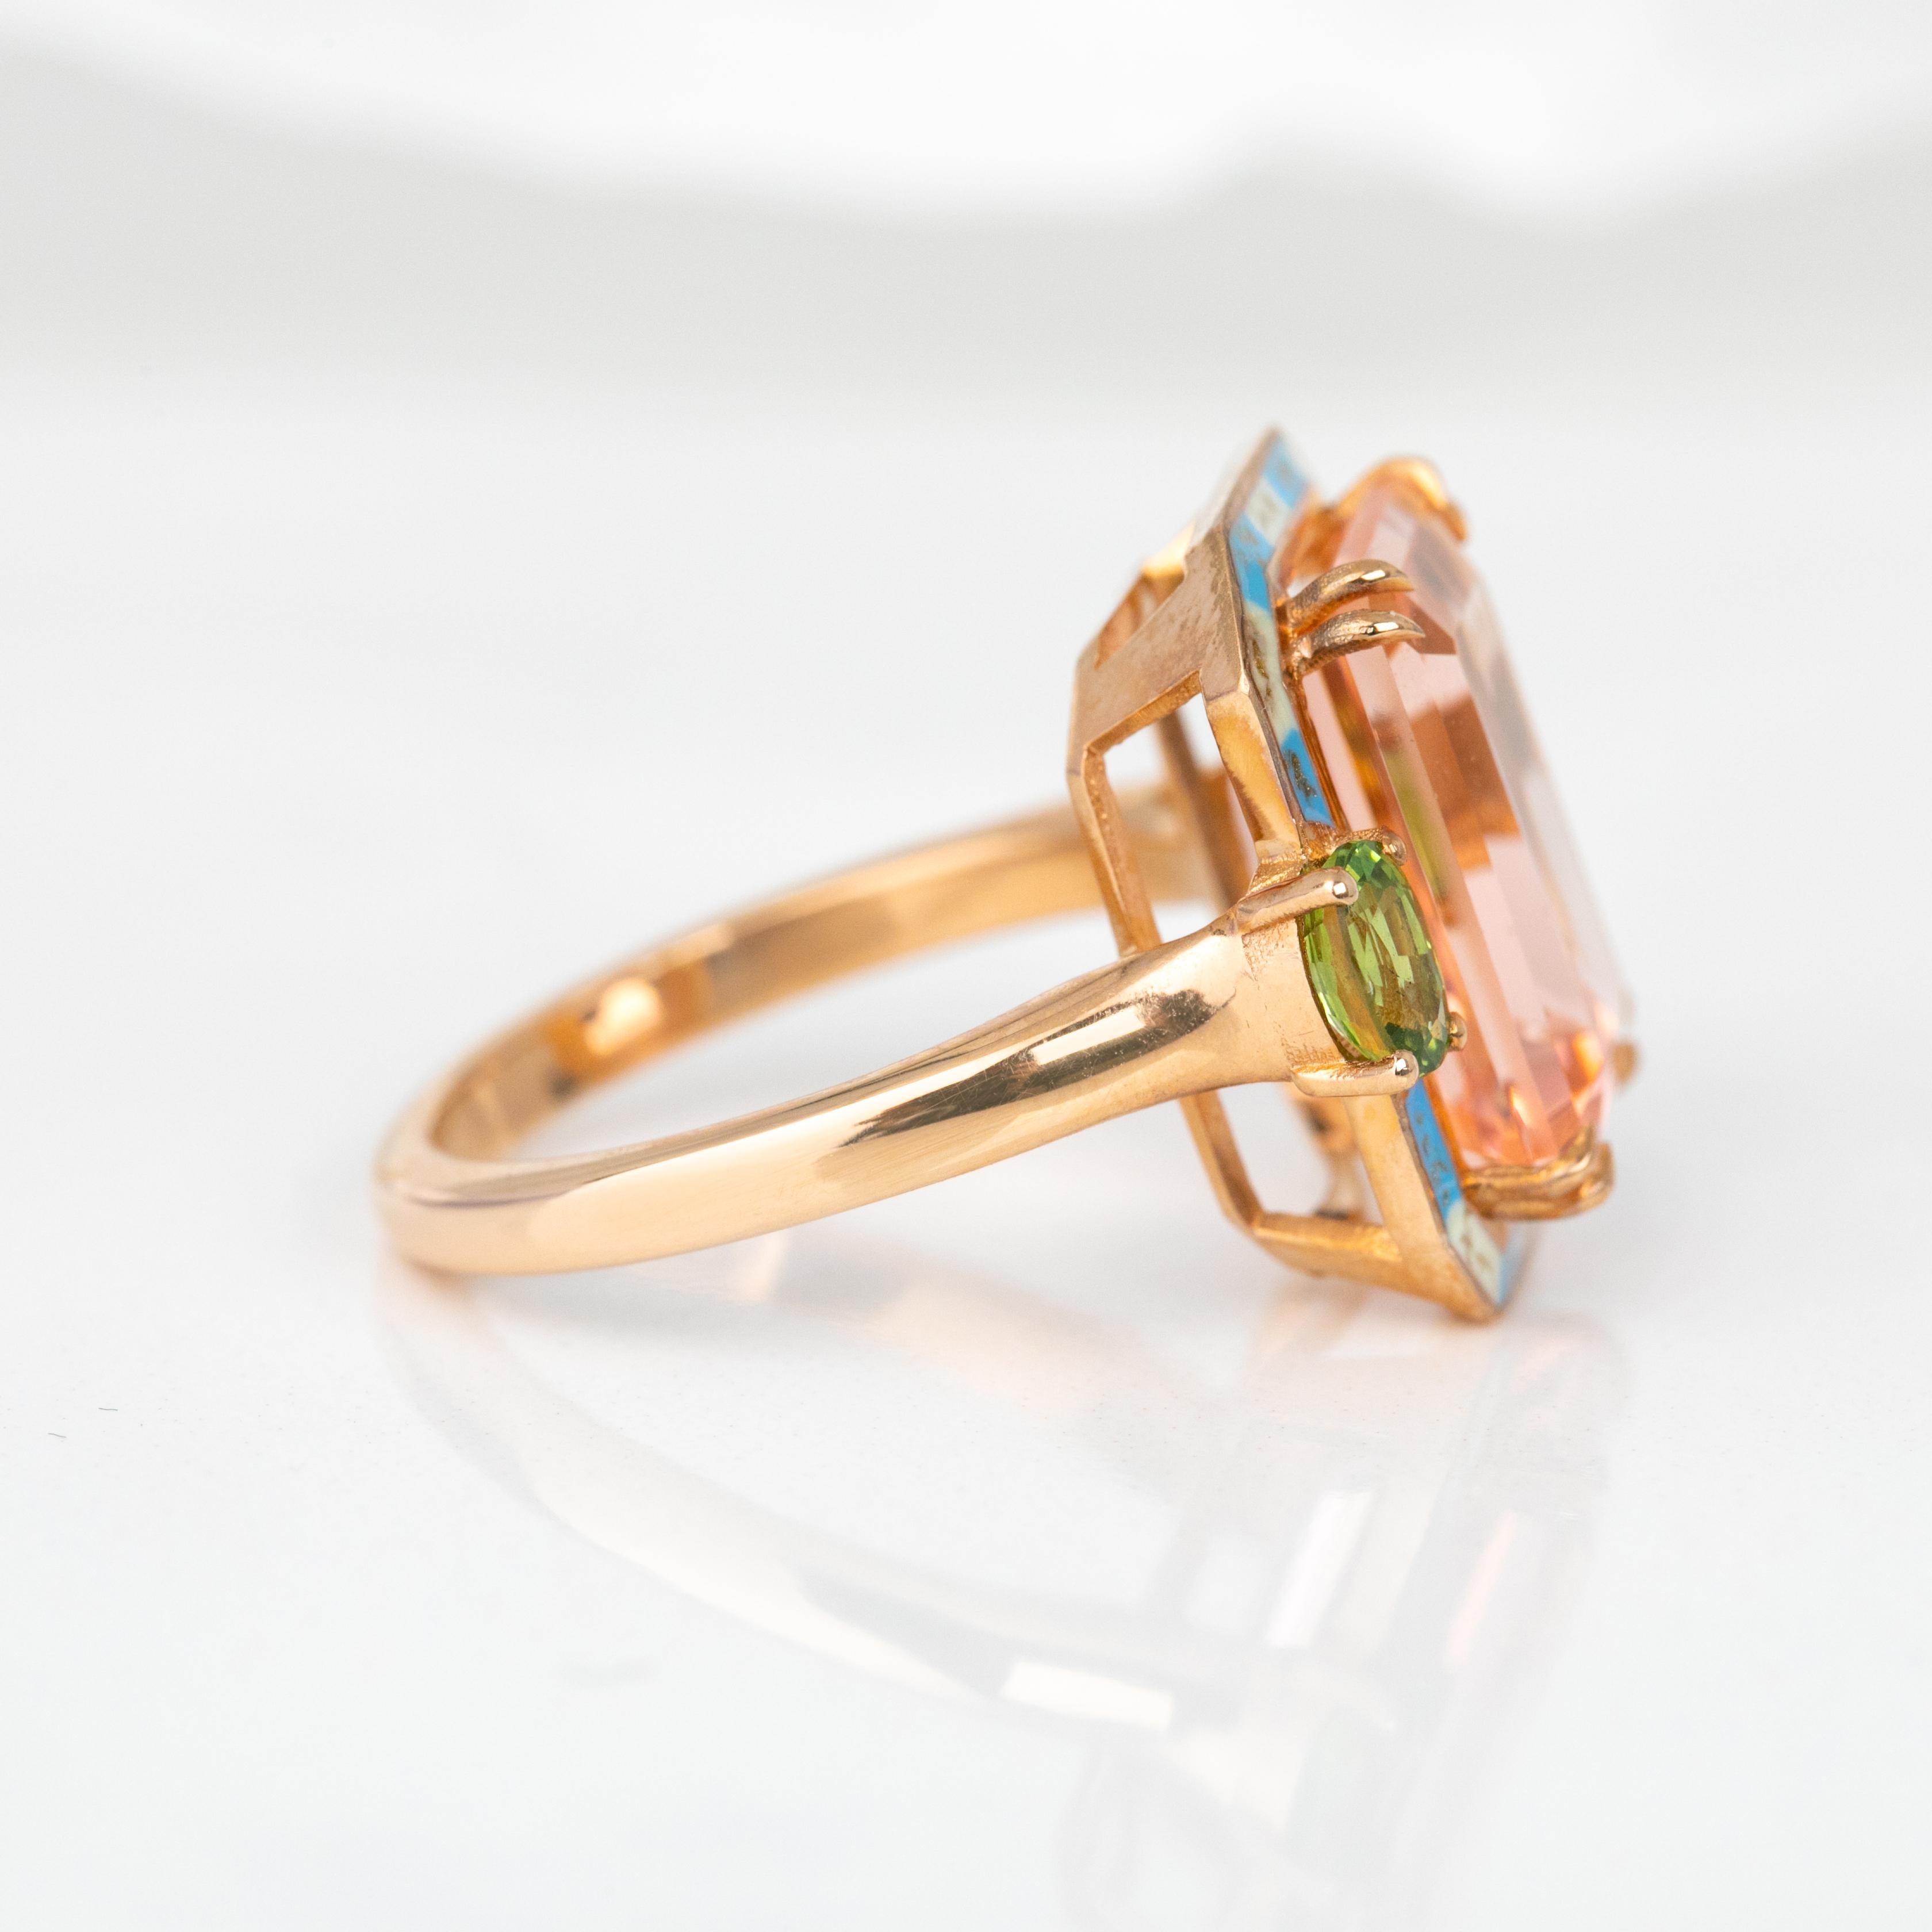 For Sale:  Art Deco Style Ring, 14k Gold Ring Pink Quartz and Pink Tourmaline Stone Ring 16